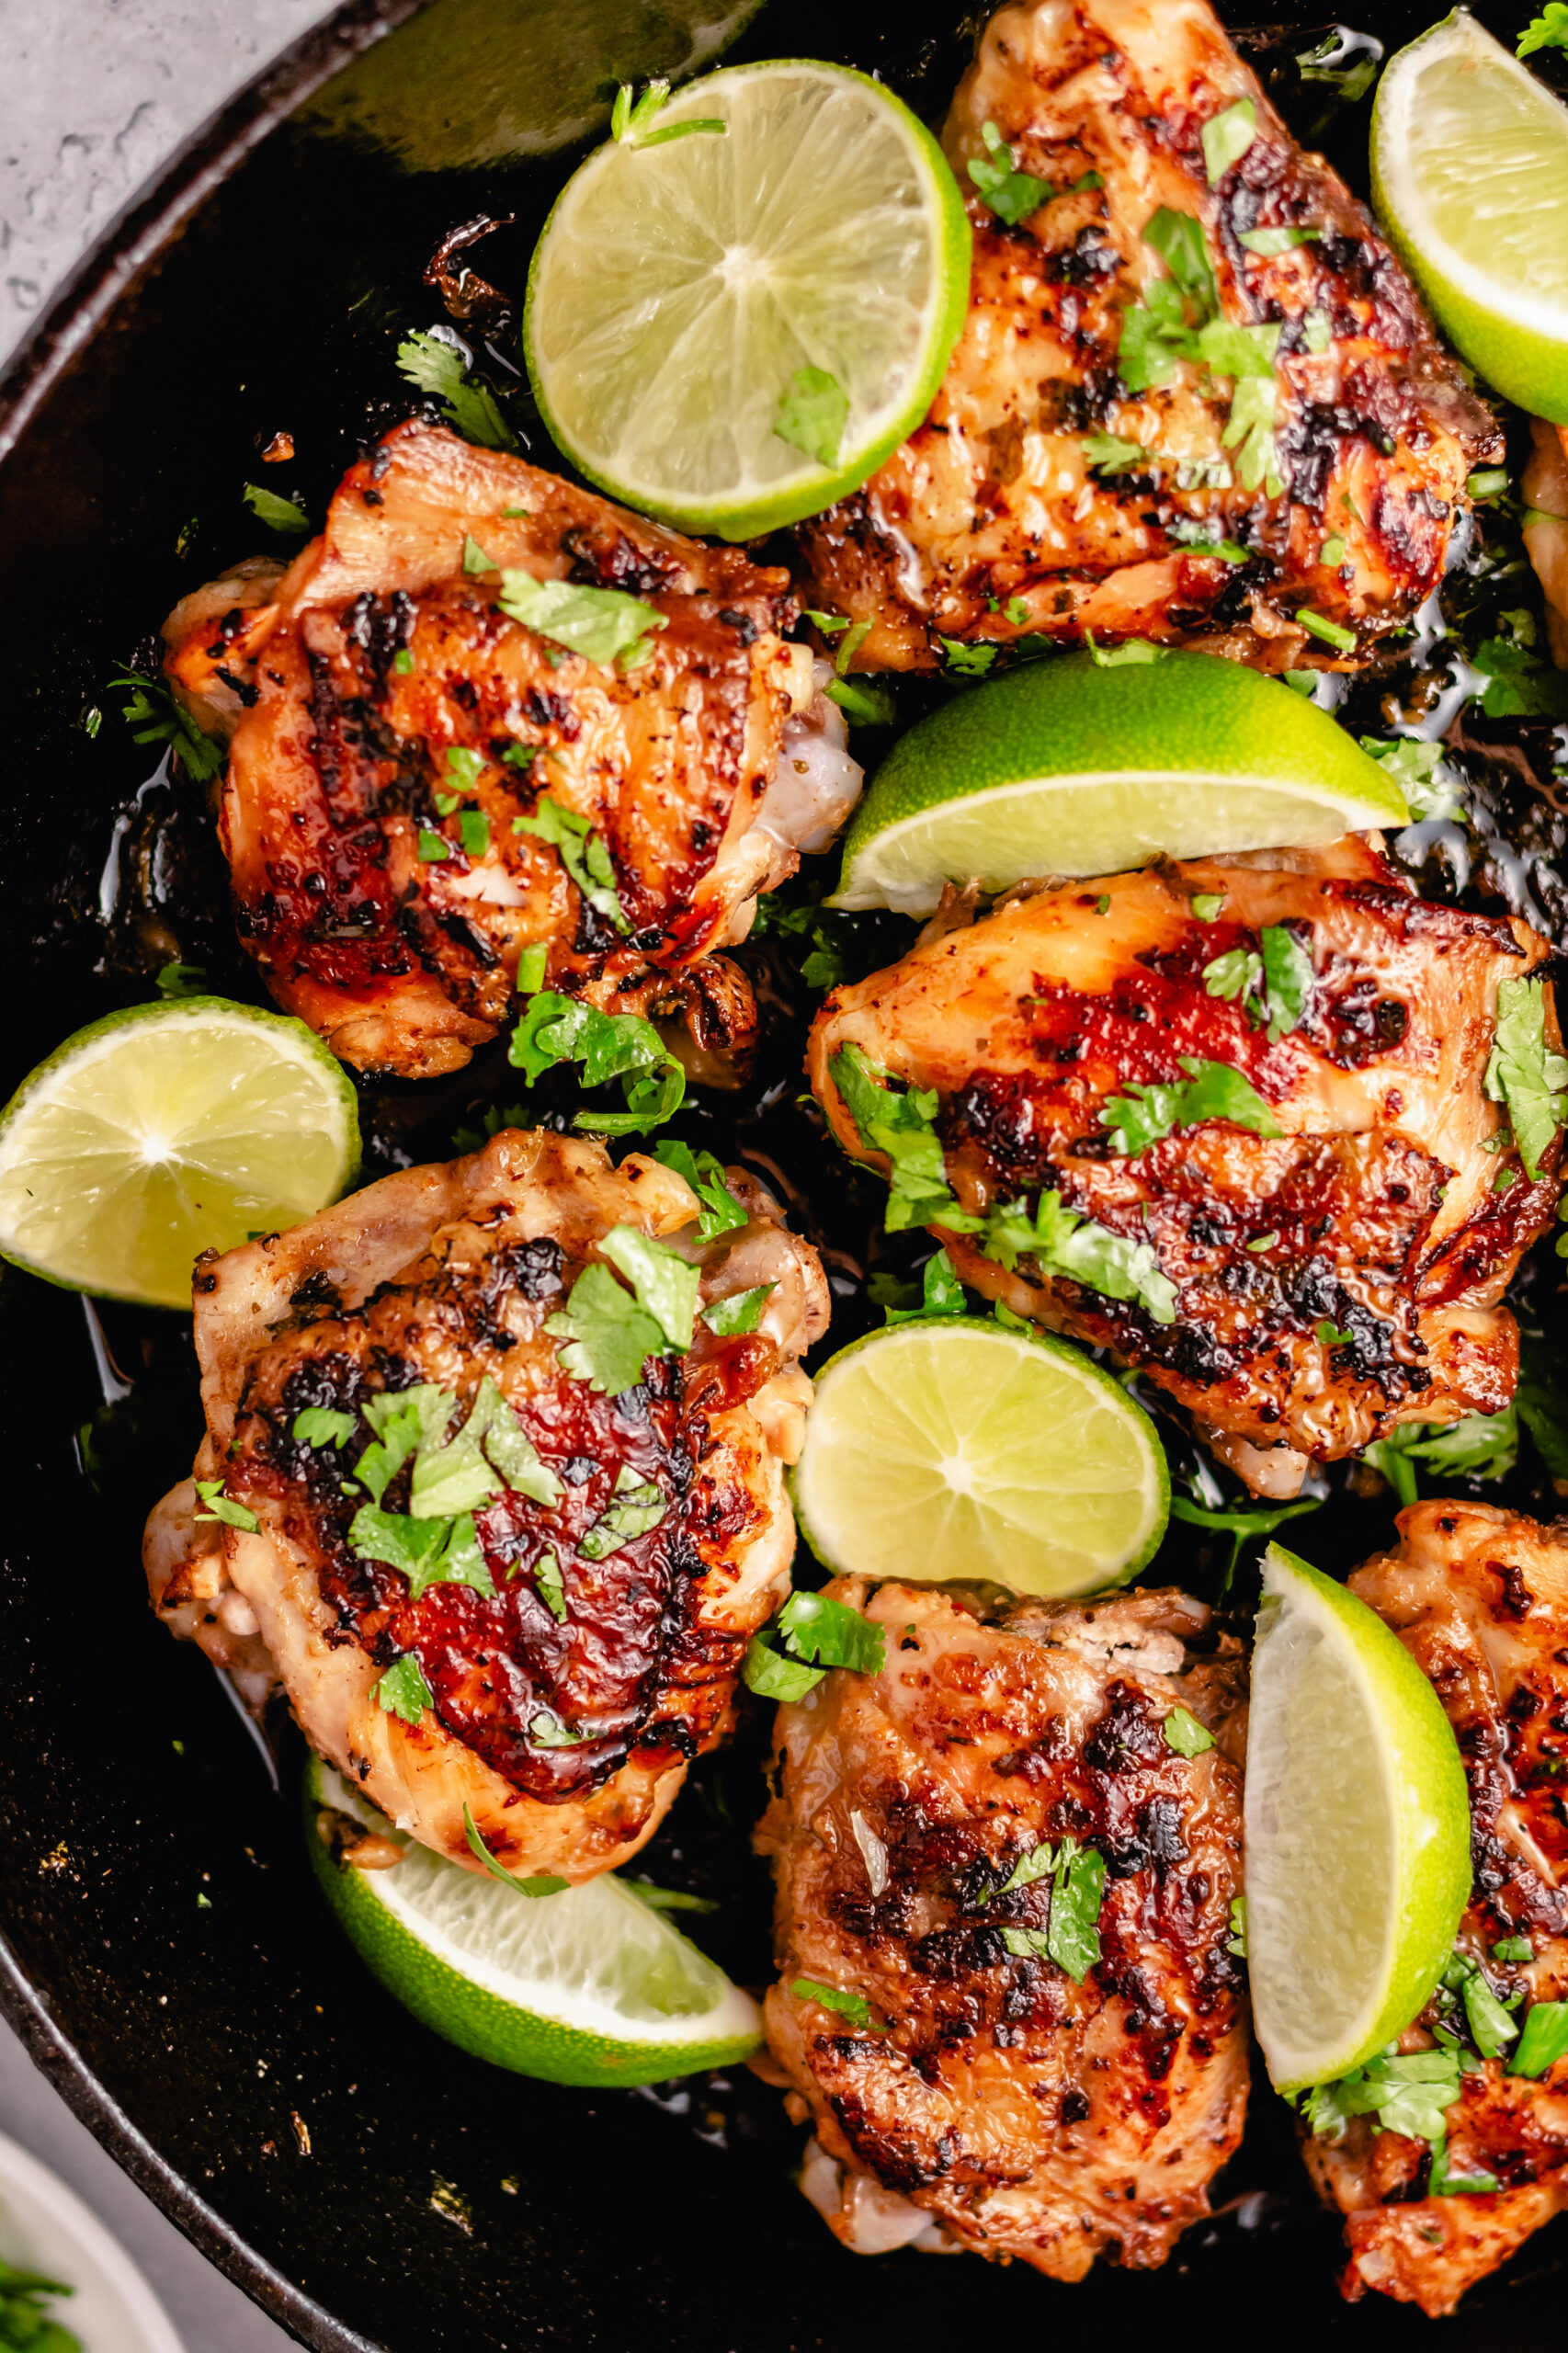 These crispy Whole30 cilantro lime chicken thighs are so delicious, and so easy to make. The skin gets perfectly crispy using this simple cooking method. They're awesome for meal prepping, or for an easy weeknight dinner. Not only are these Whole30 chicken thighs, but they're Paleo, gluten free and low carb too! #chickenthighs #cilantrolime #whole30chicken #lowcarbchicken